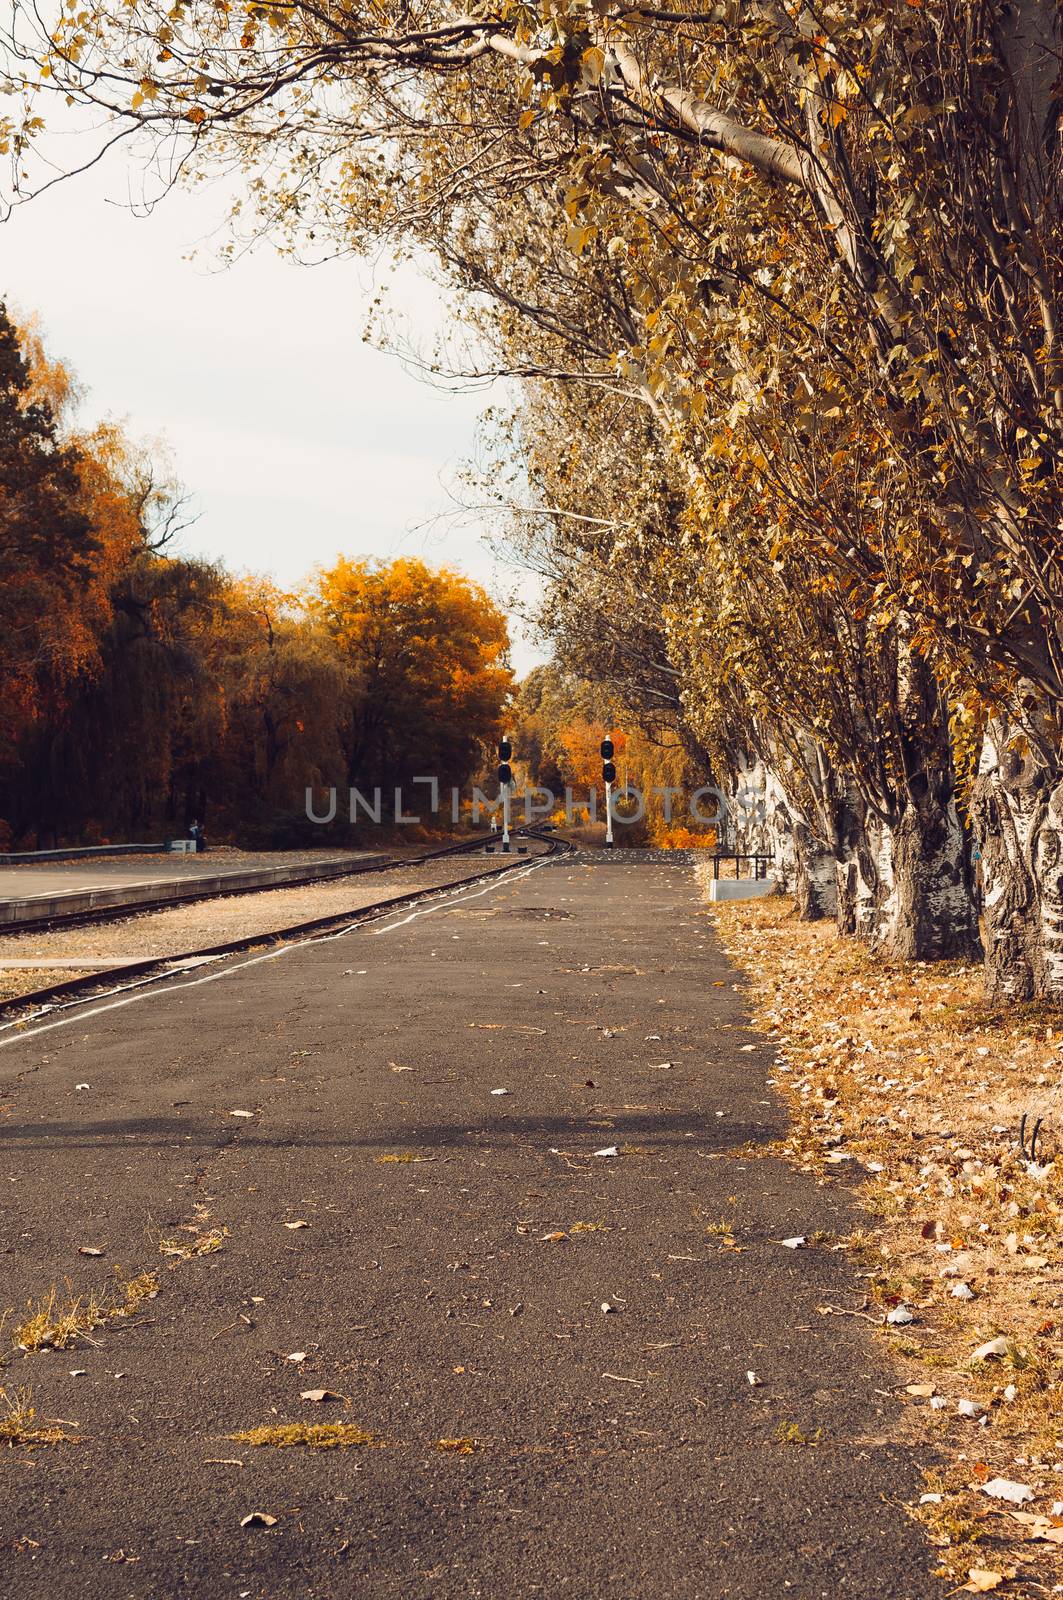 Autumn sunny landscape. A road in an autumn park with trees and fallen yellow leaves on the ground on a sunny October day. Template for design. by Alla_Morozova93